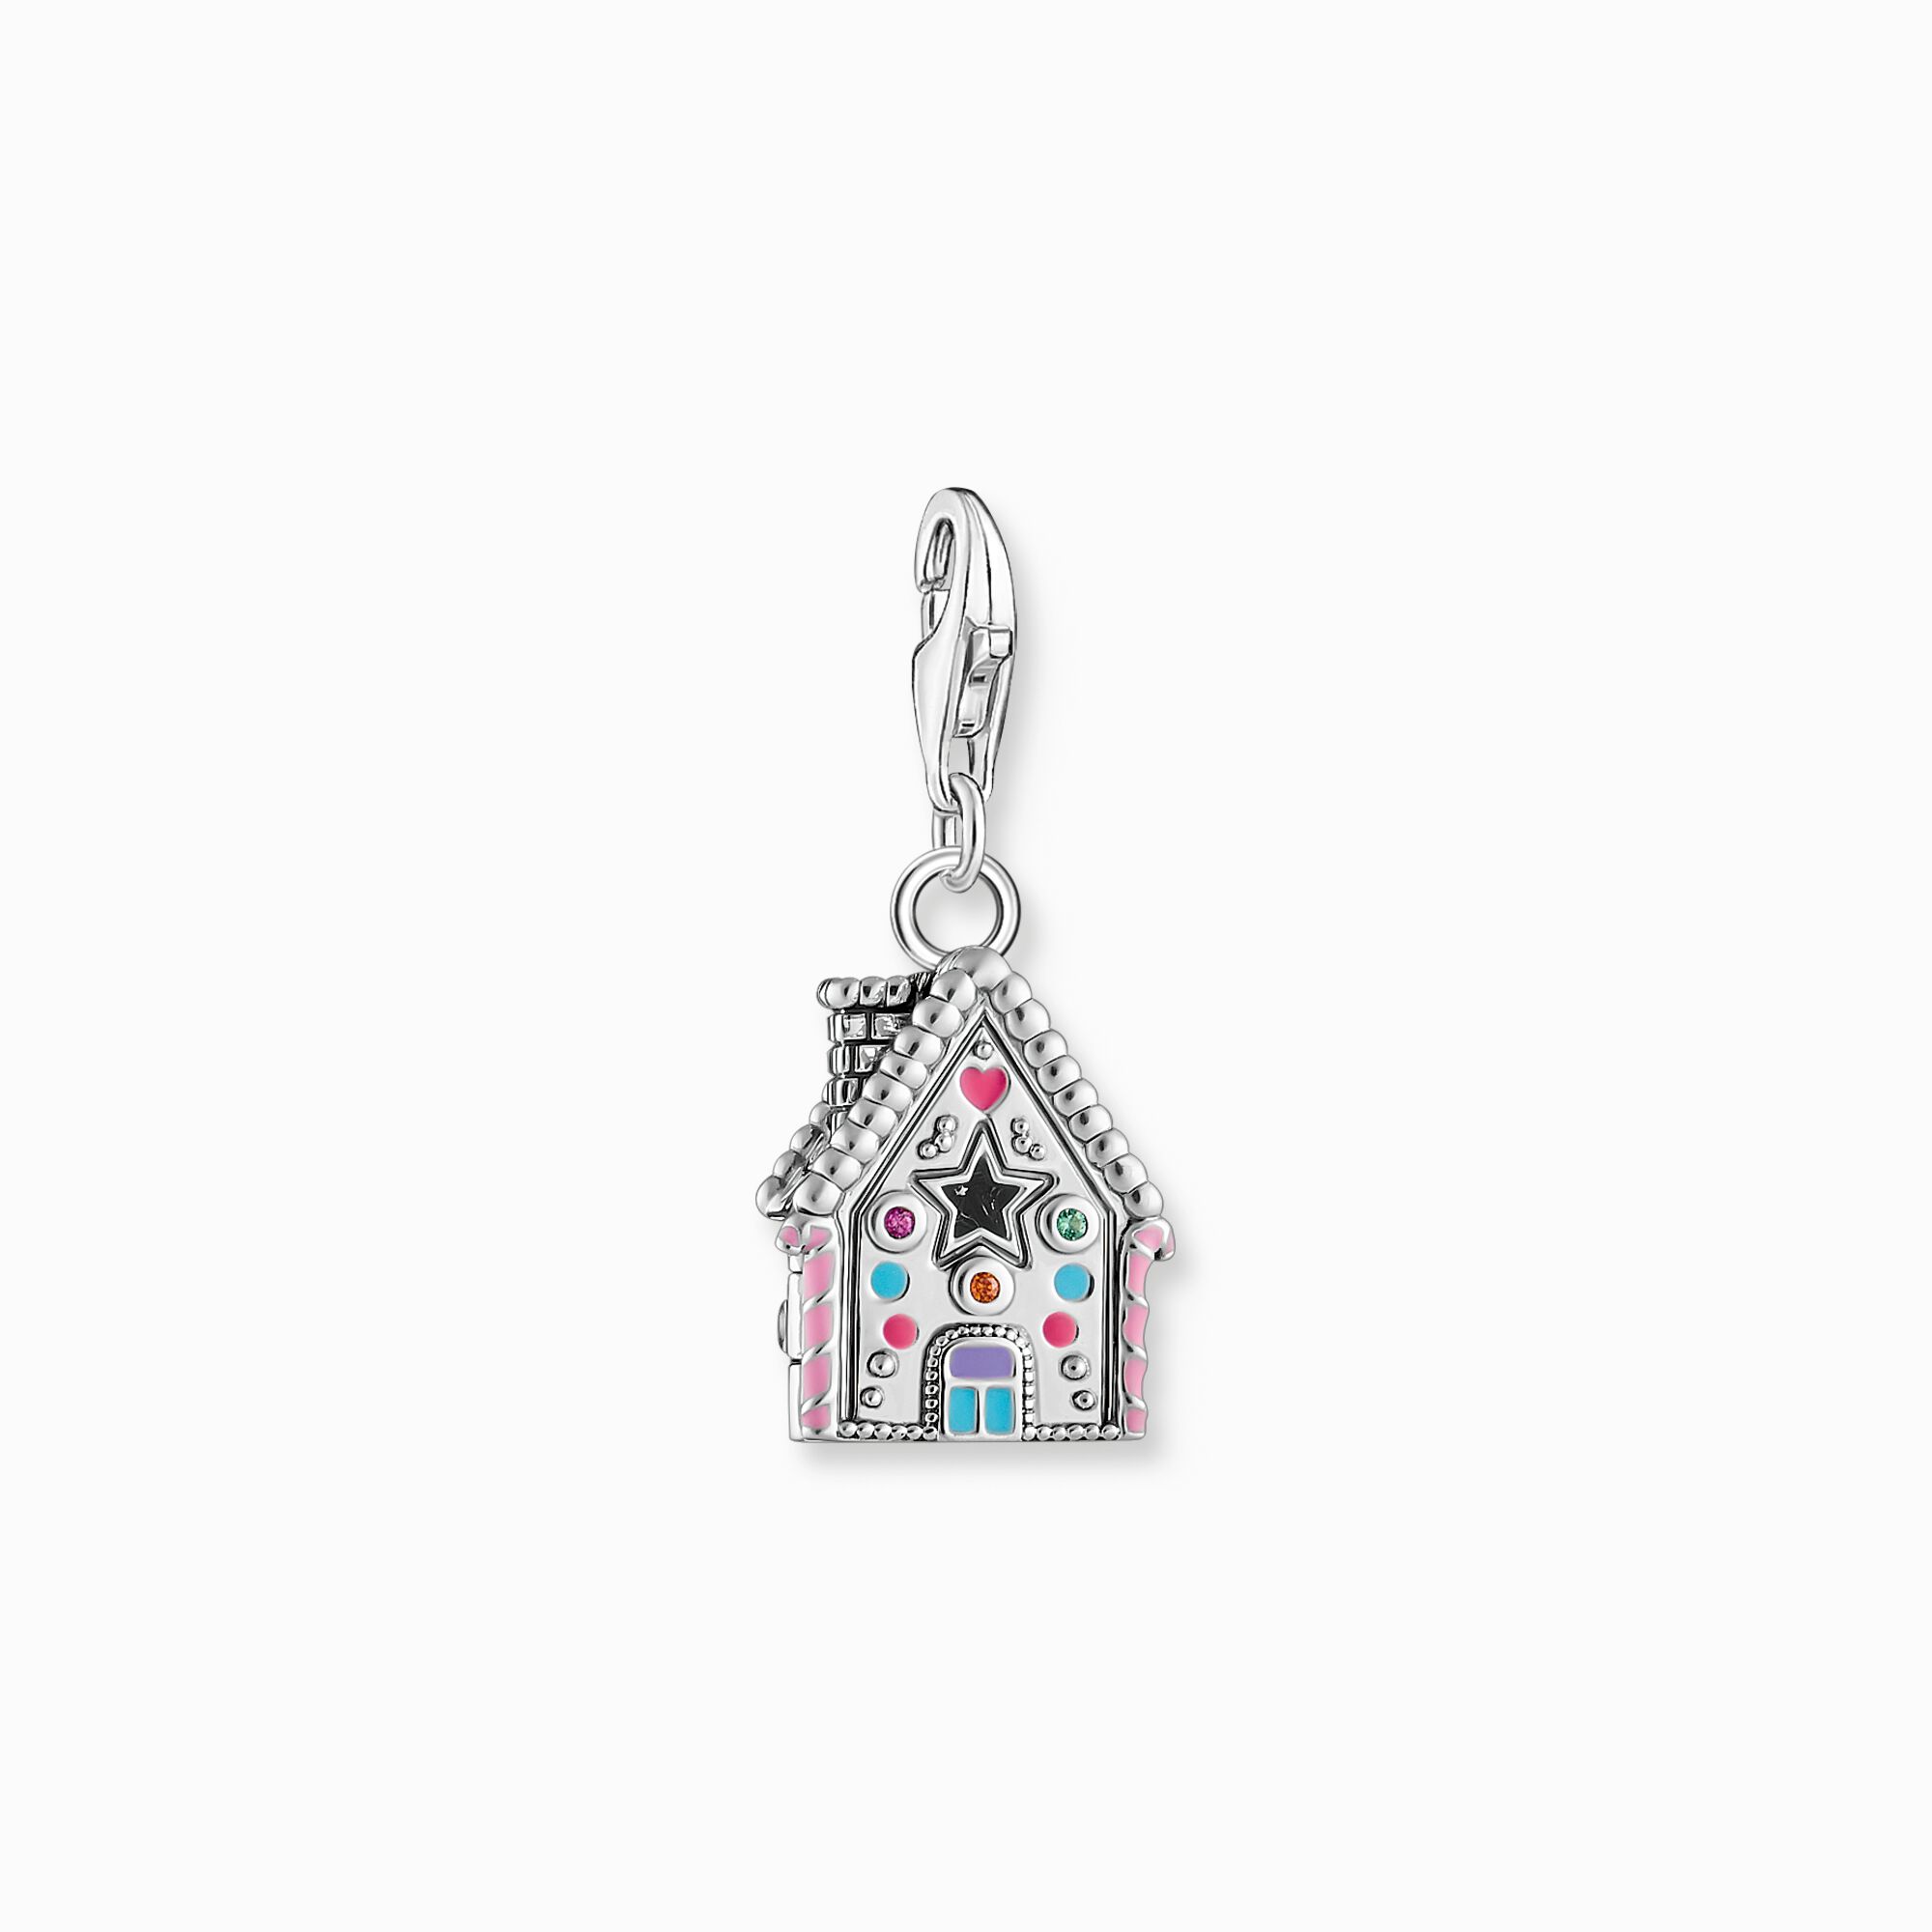 Silver gingerbread house charm pendant from the Charm Club collection in the THOMAS SABO online store